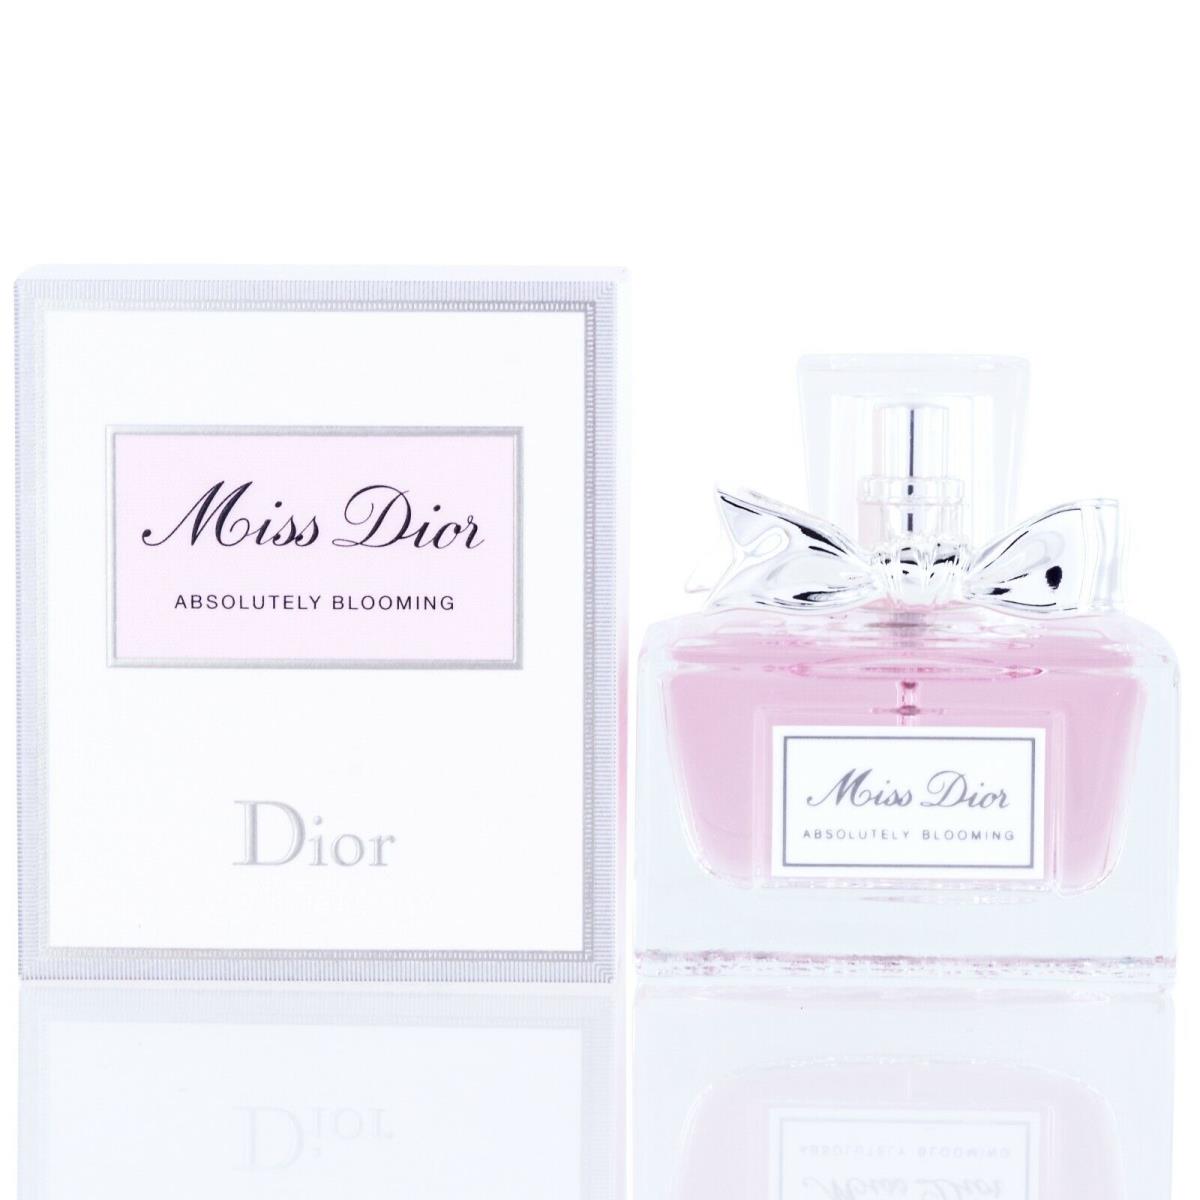 Miss Dior Absolutely Blooming For Women by Christian Dior Edp Spray 1.0 Oz